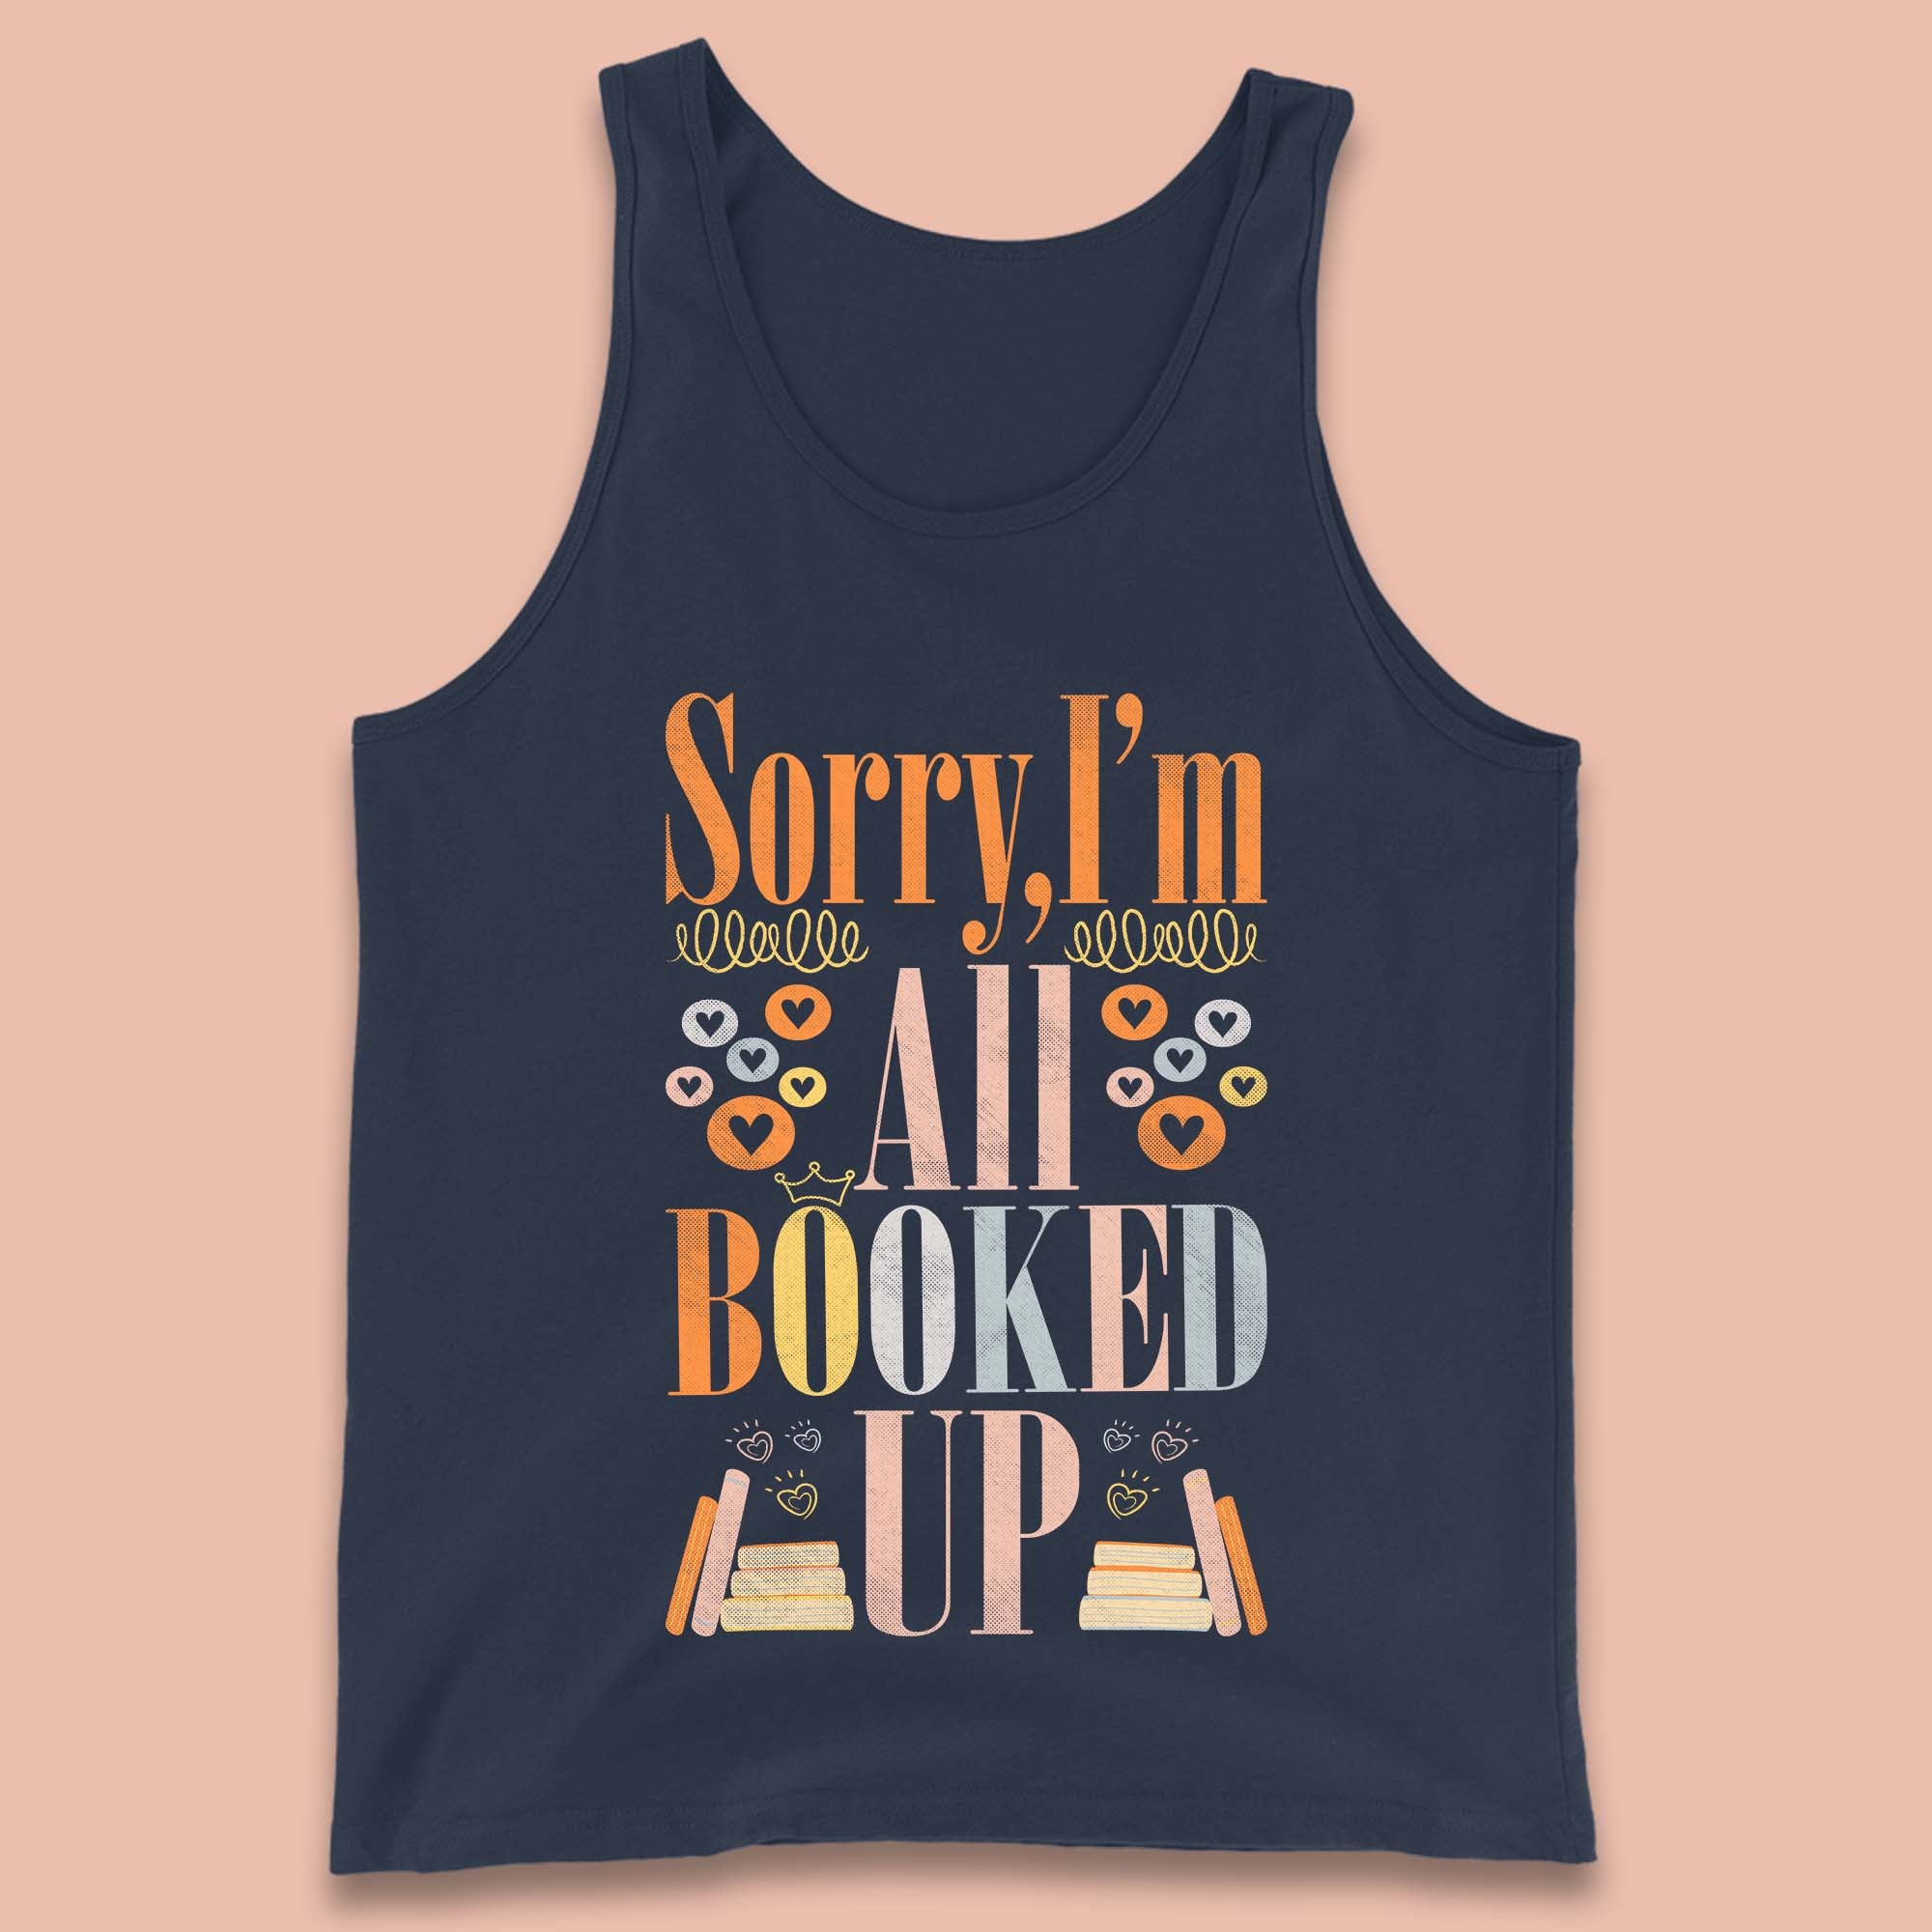 Sorry I'm All Booked Up Book Lover Book Nerd Bookish Librarian Tank Top